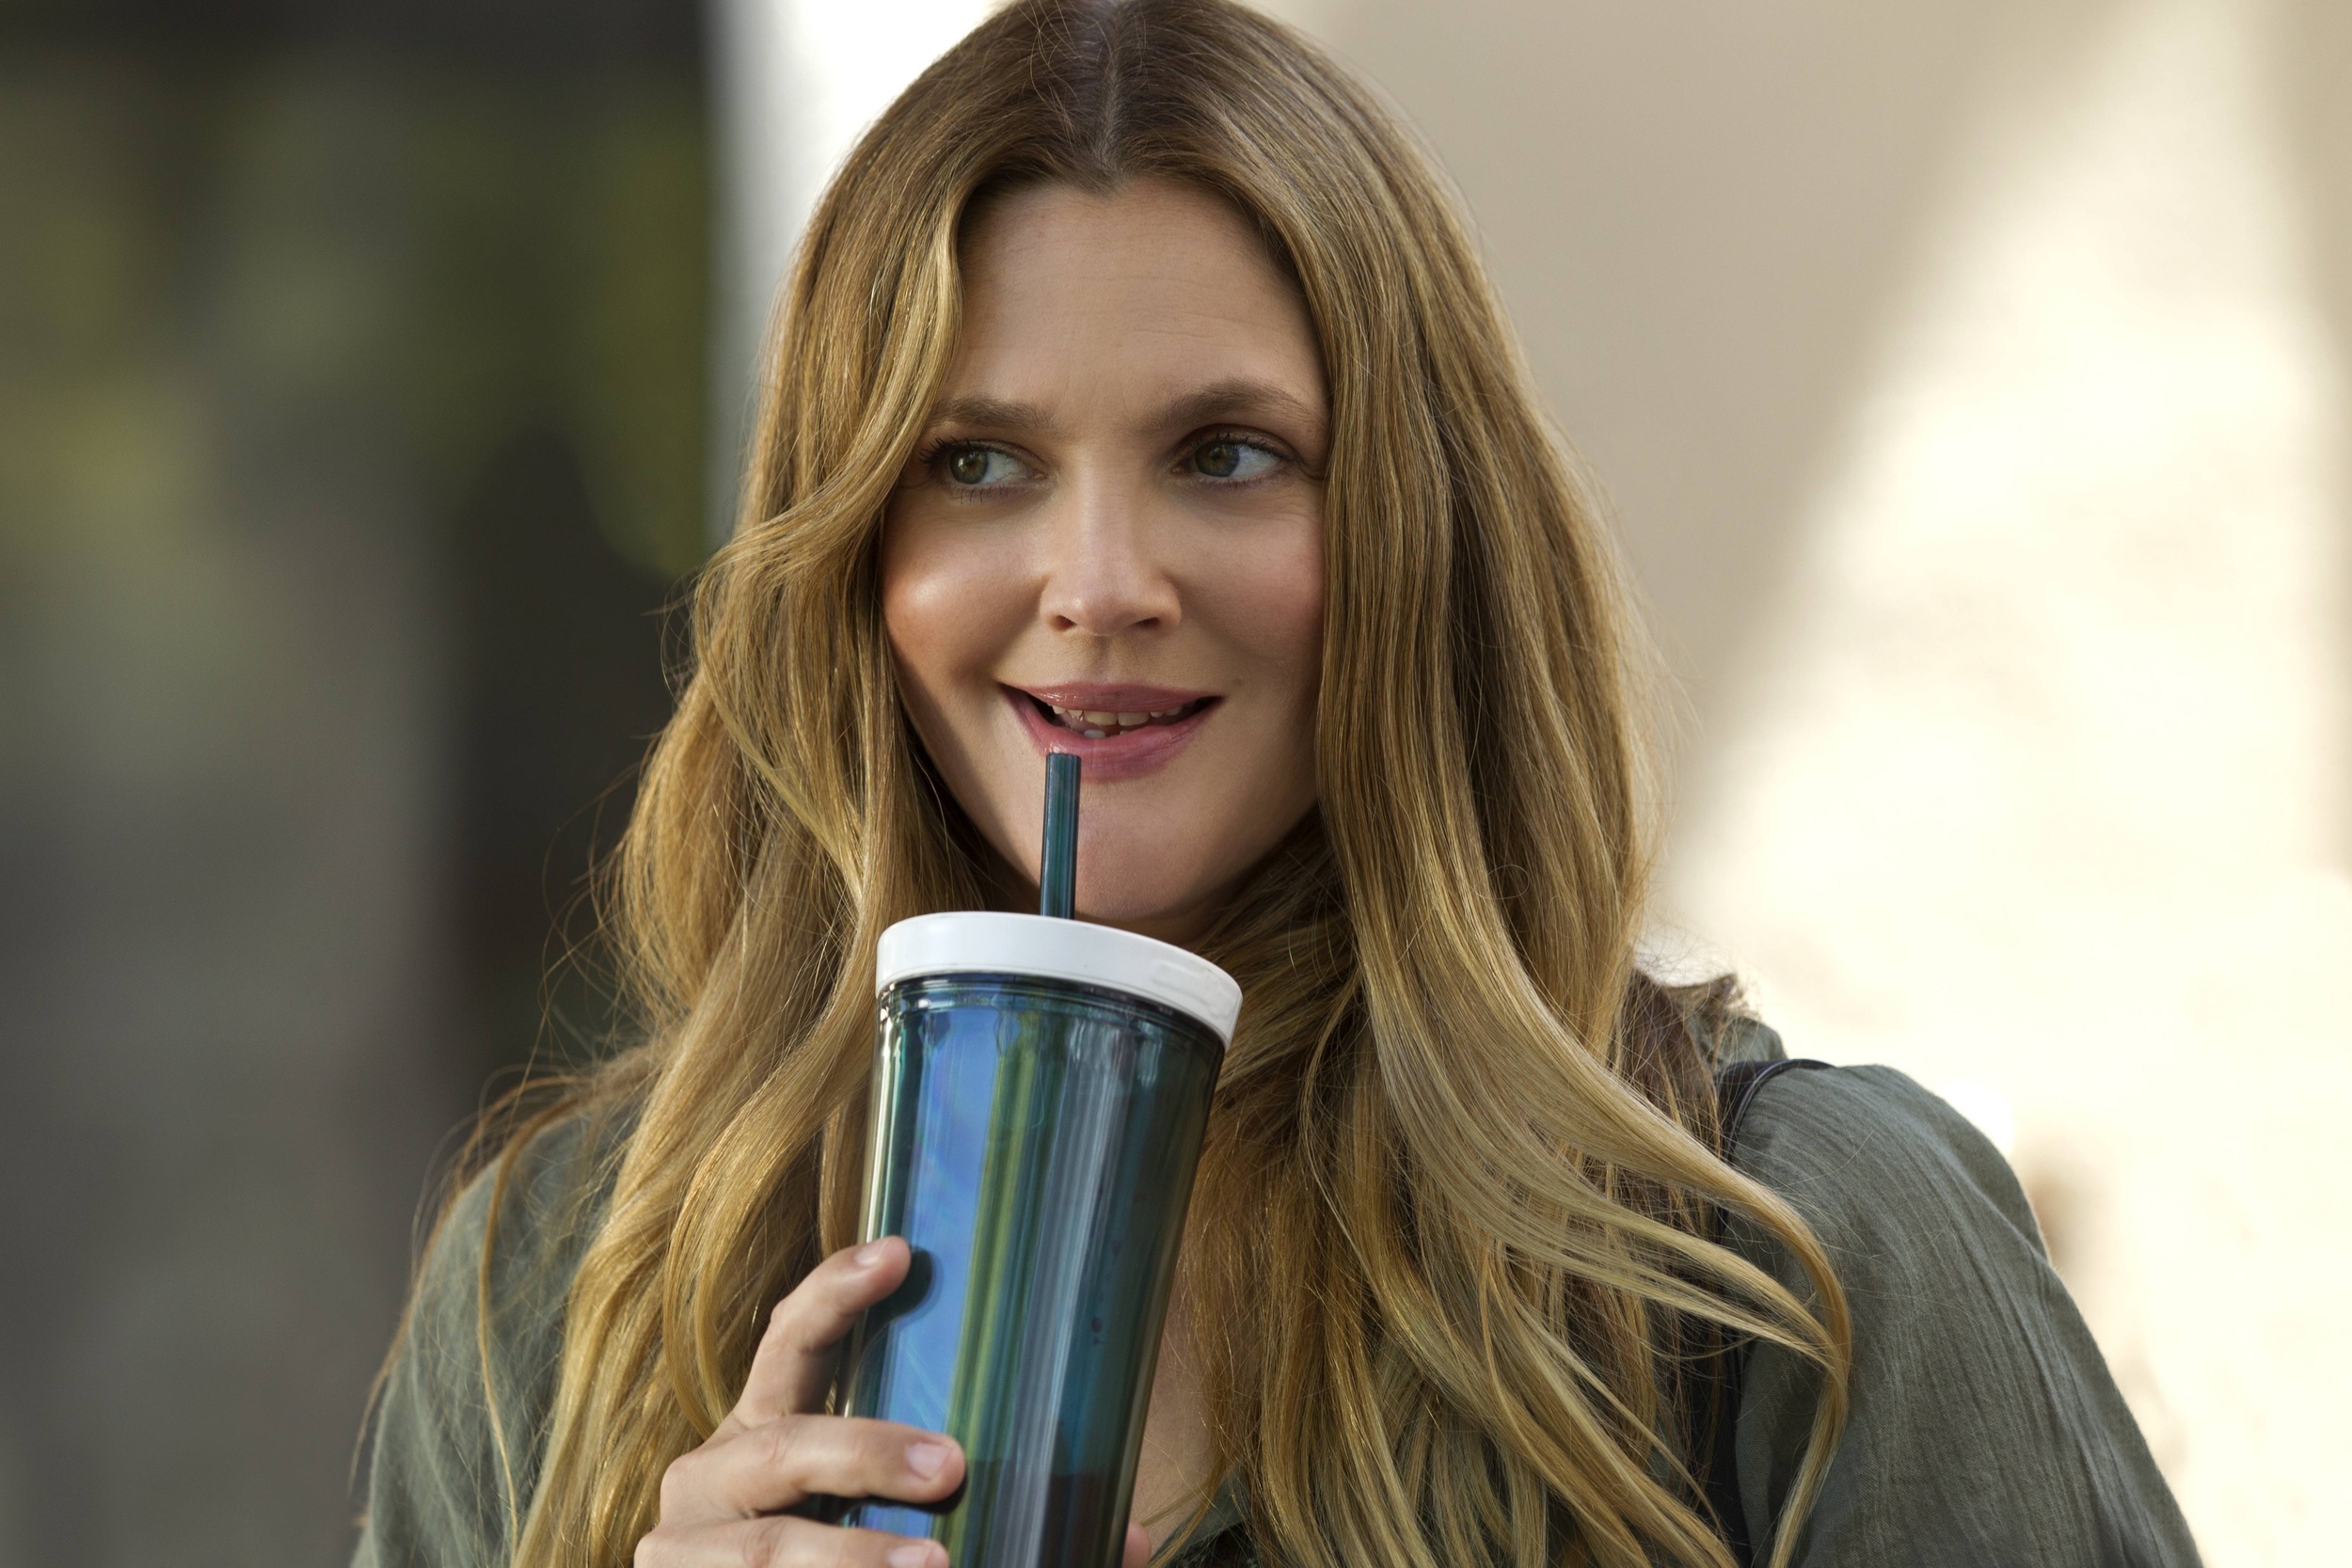 <p>There is more than one way to turn to TV. Barrymore isn’t acting on television these days, at least not after the end of her show <em>Santa Clarita Diet</em>. Instead, she’s the host of <em>The Drew Barrymore Show</em>, a daytime talk show highlighted by Barrymore’s idiosyncratic hosting style.</p><p>You may also like: <a href='https://www.yardbarker.com/entertainment/articles/what_are_the_must_see_concerts_of_2024_030424/s1__40032109'>What are the must-see concerts of 2024?</a></p>